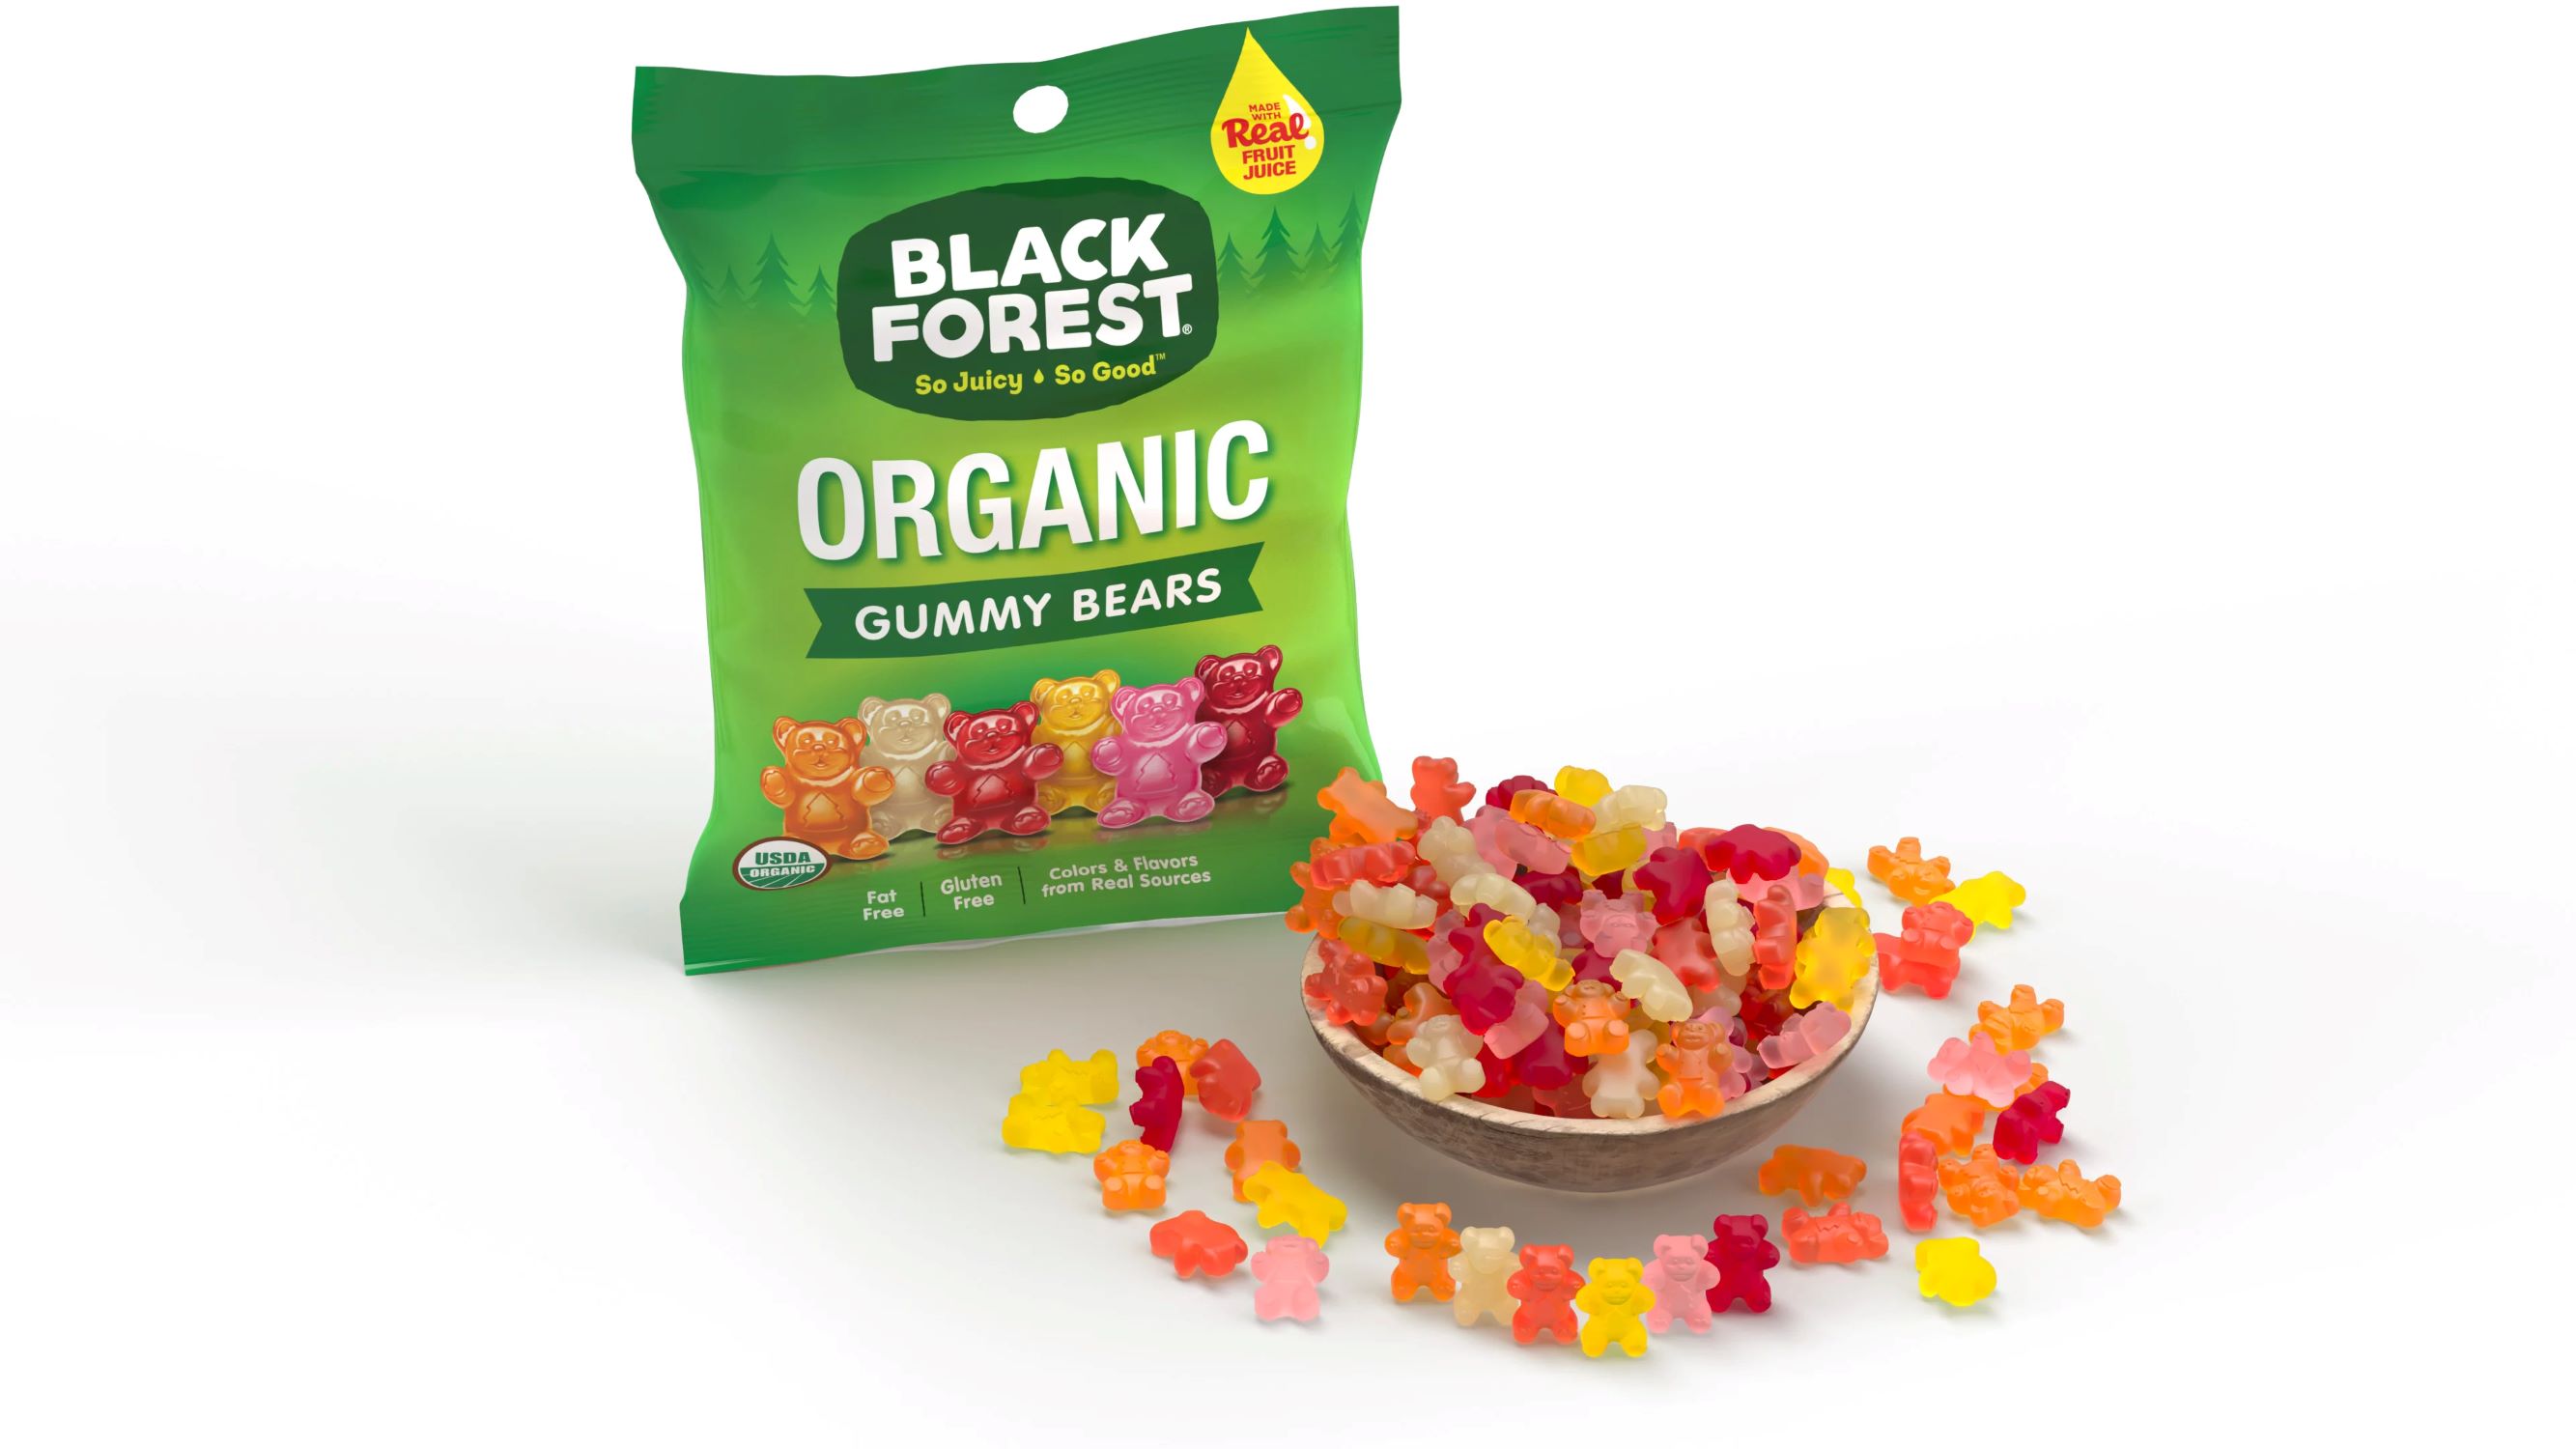 18 Black Forest Organic Gummy Bears Nutrition Facts - Facts.net